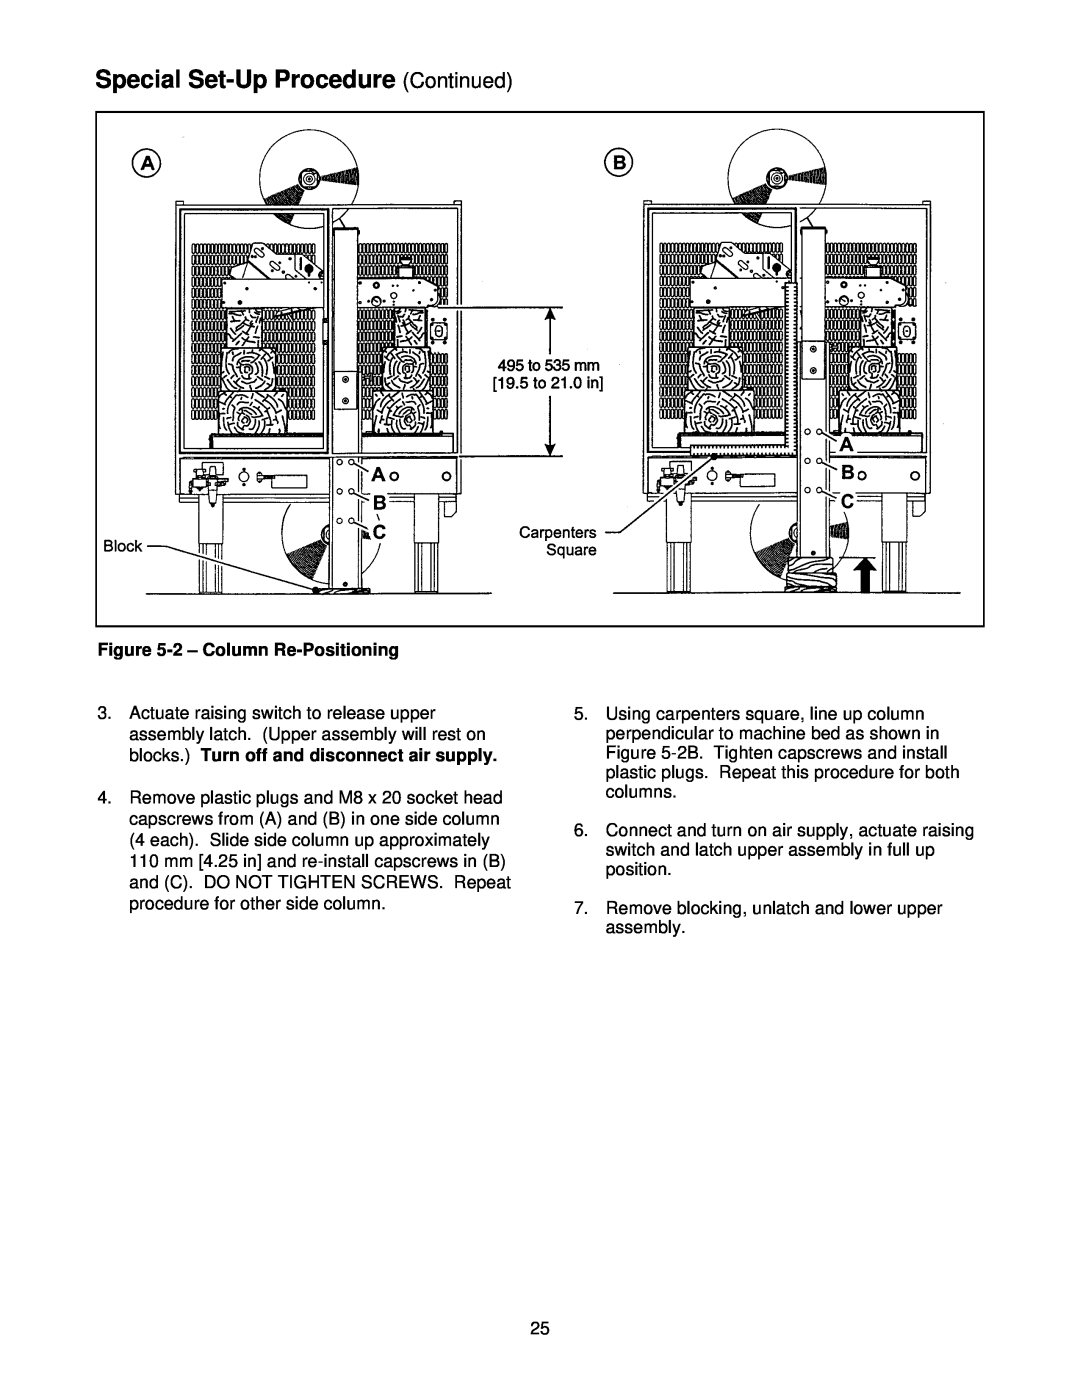 3M 800r3 manual Special Set-Up Procedure Continued, 2 - Column Re-Positioning 